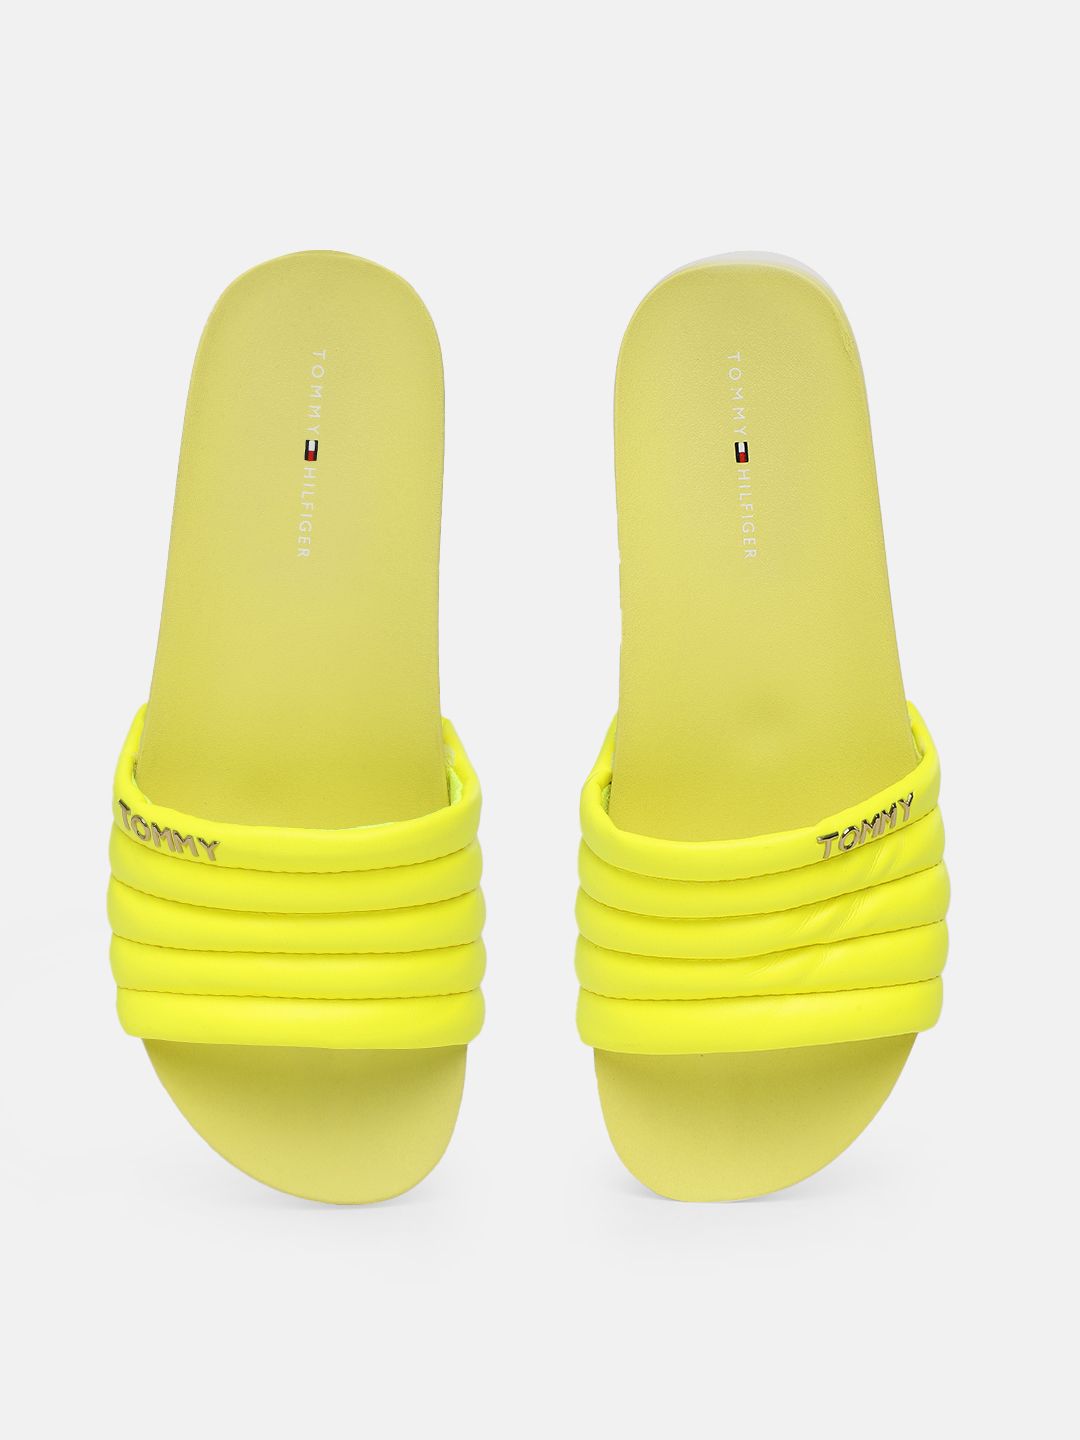 Tommy Hilfiger Women Yellow Solid Sliders Price in India